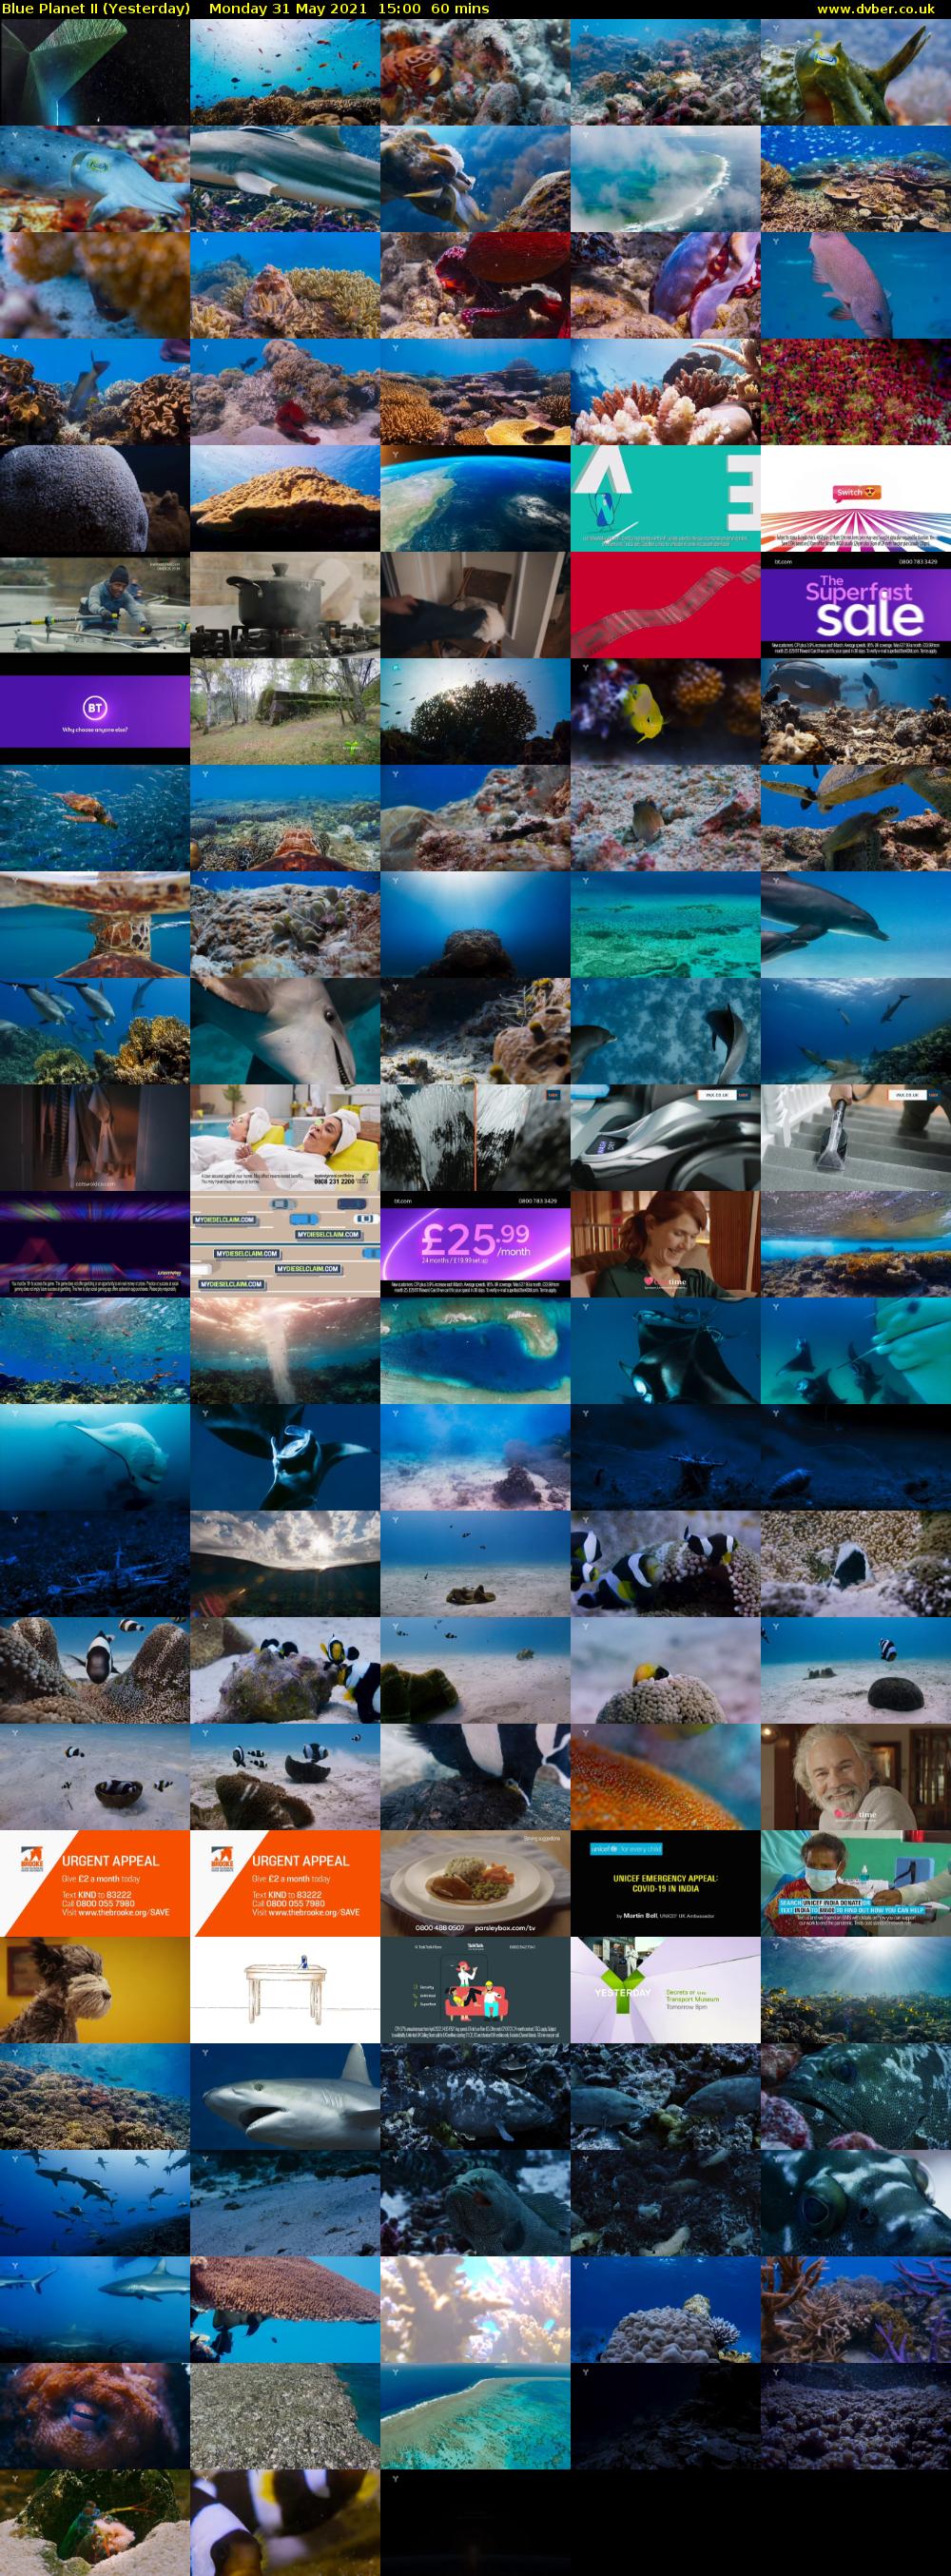 Blue Planet II (Yesterday) Monday 31 May 2021 15:00 - 16:00